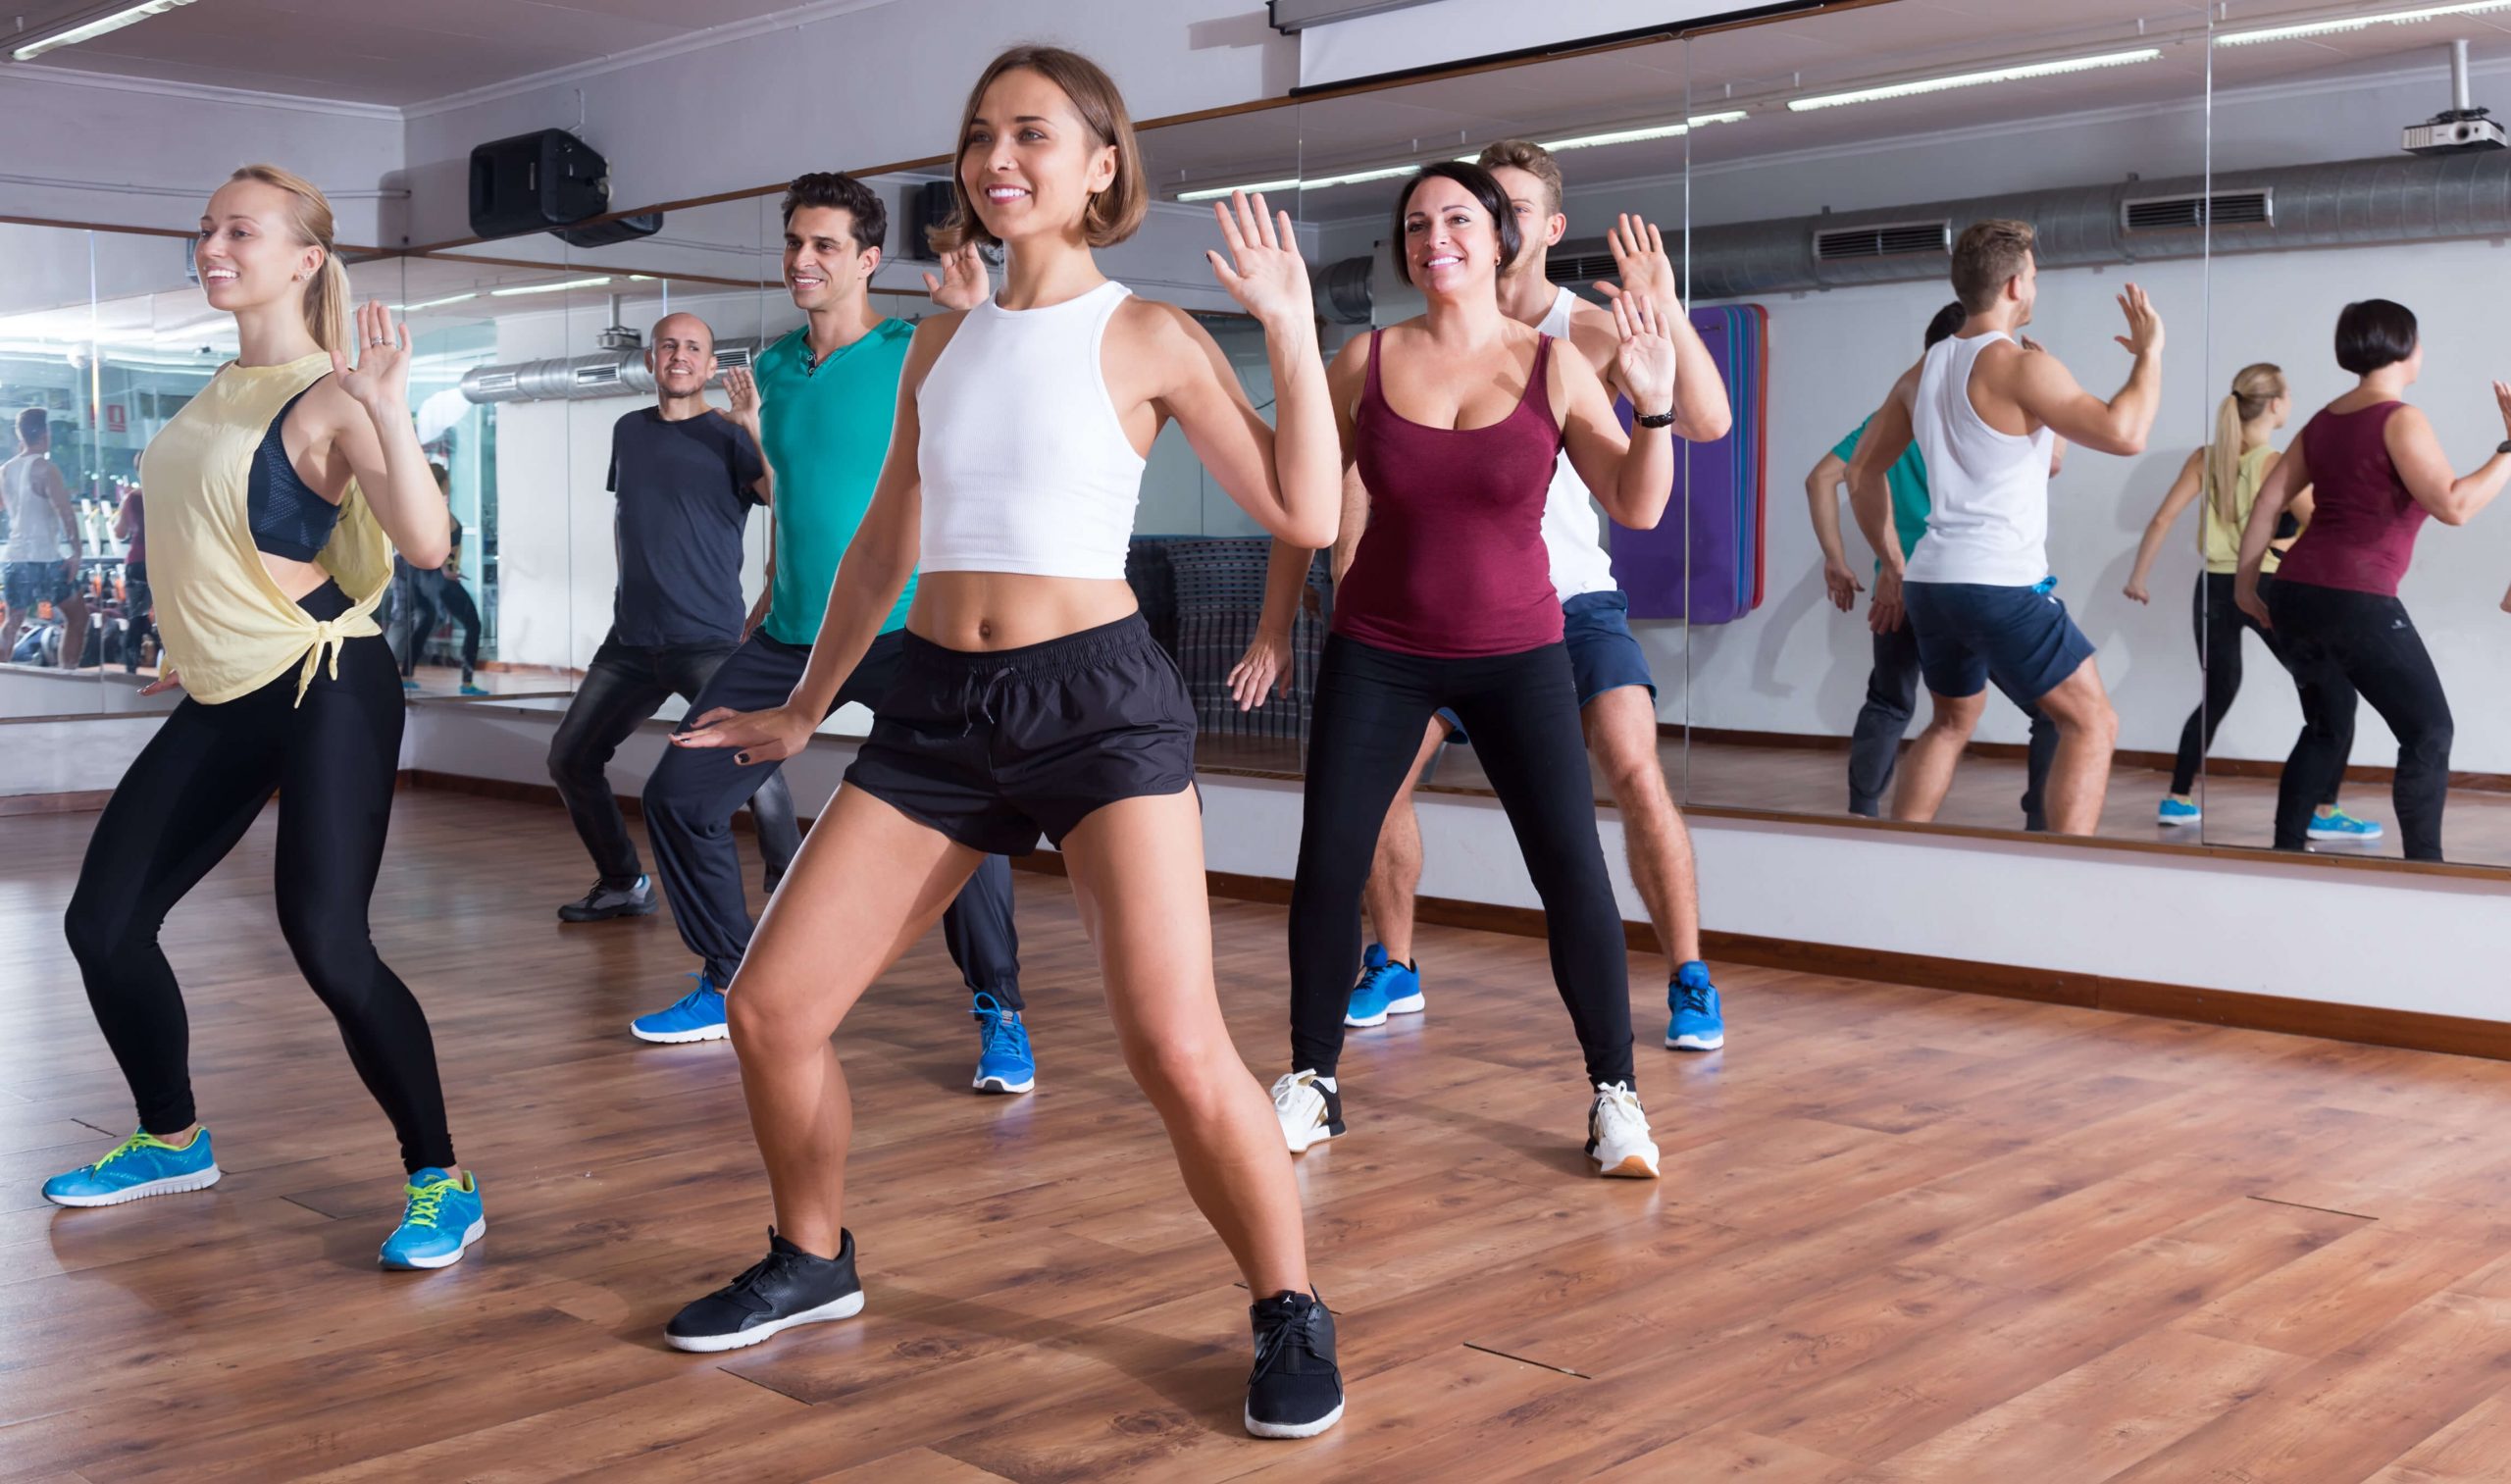 What does Zumba training give us?